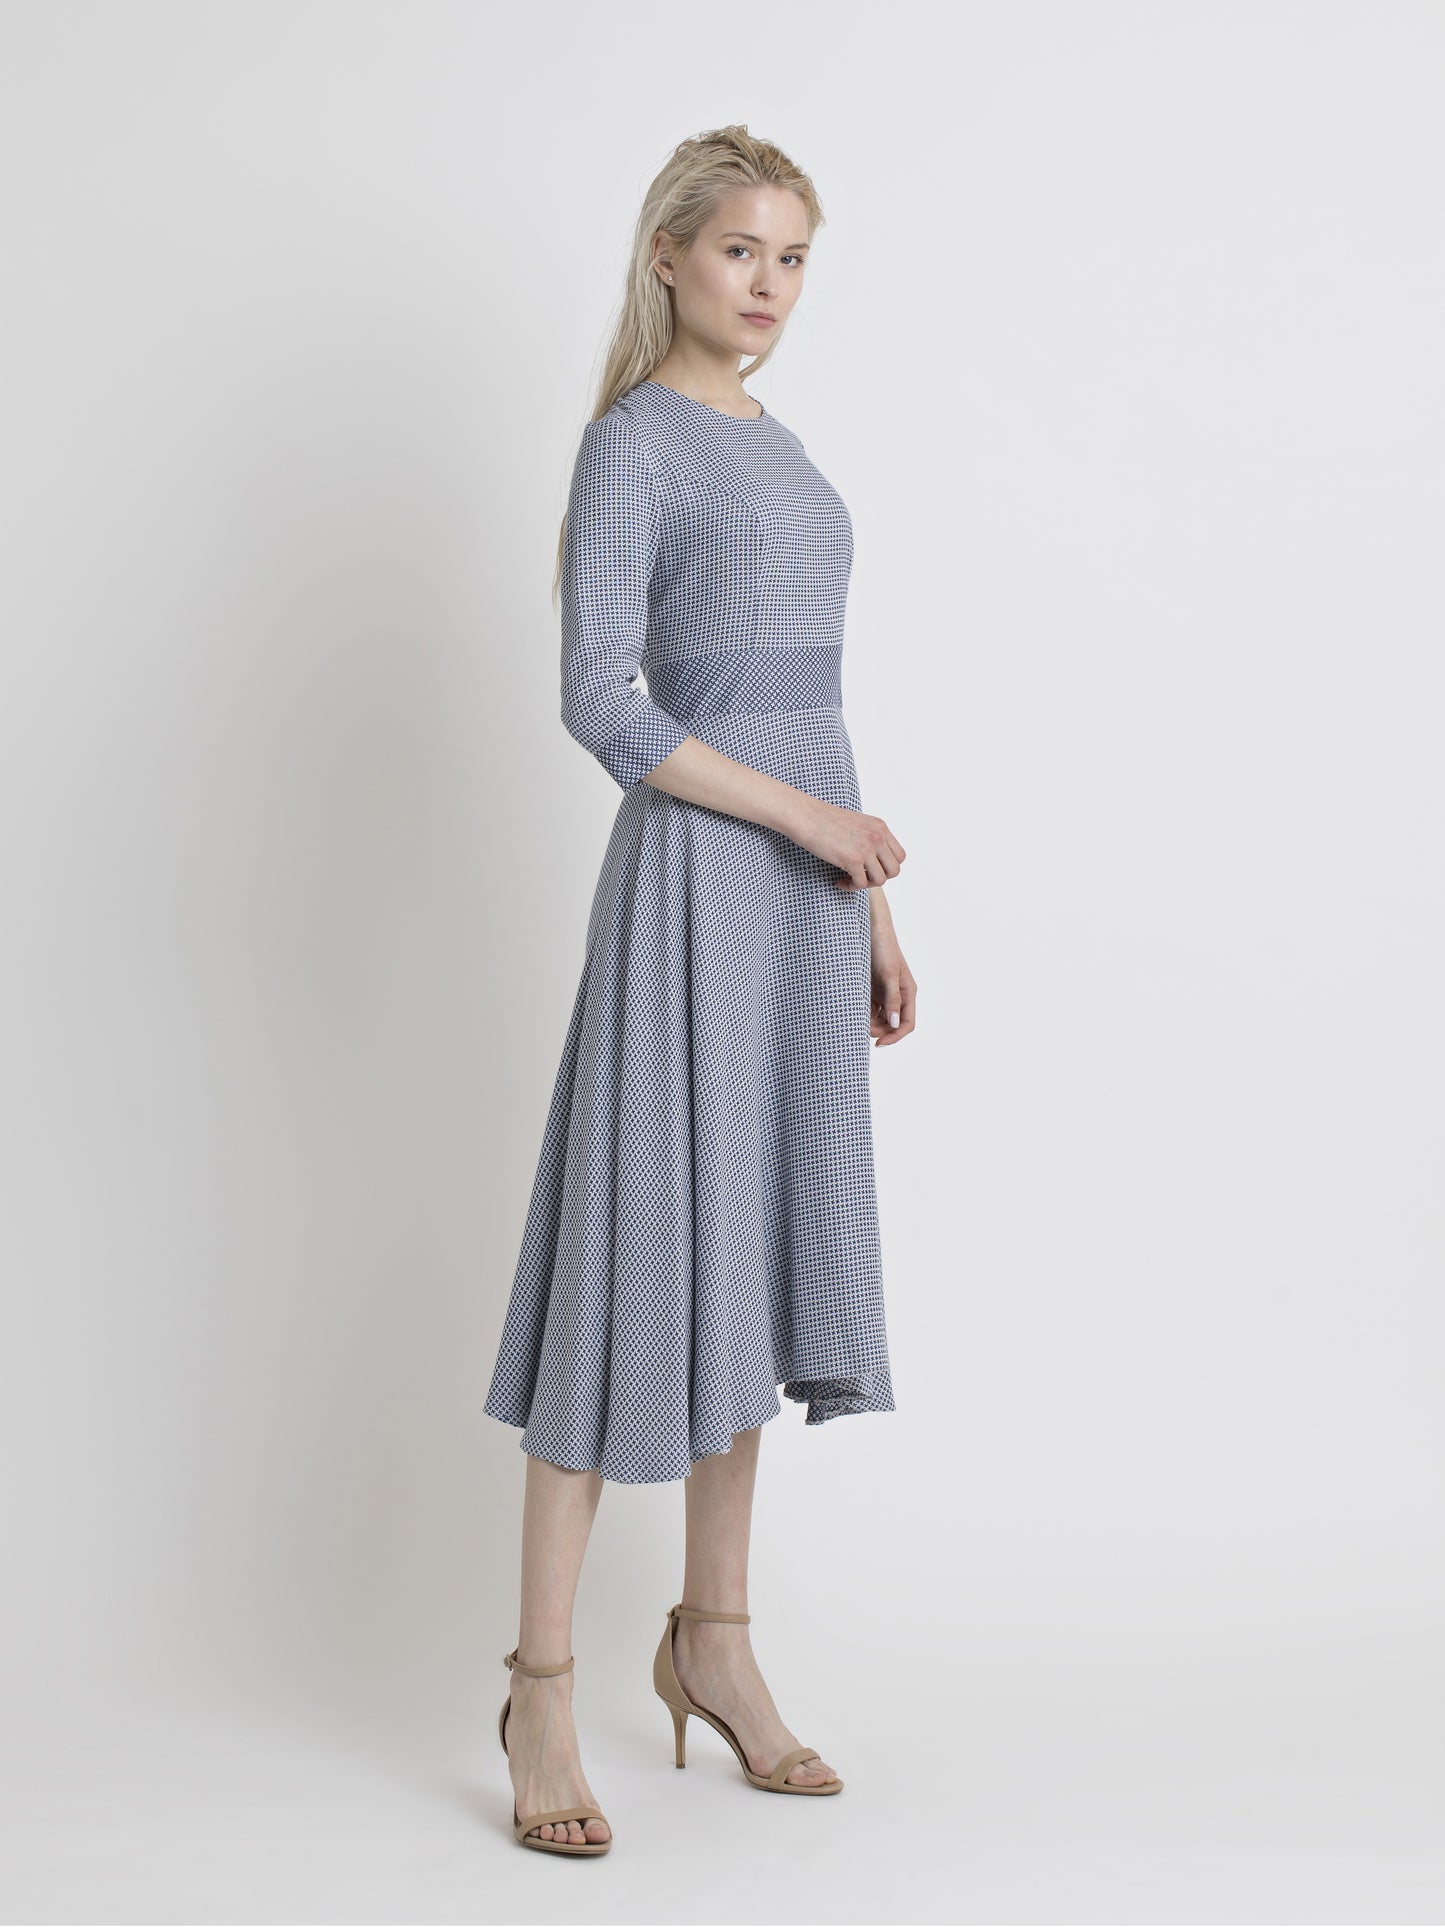 Asymmetric knee length dress with a closed neck and elbow sleeve. Blue and white star design viscose cotton fabric